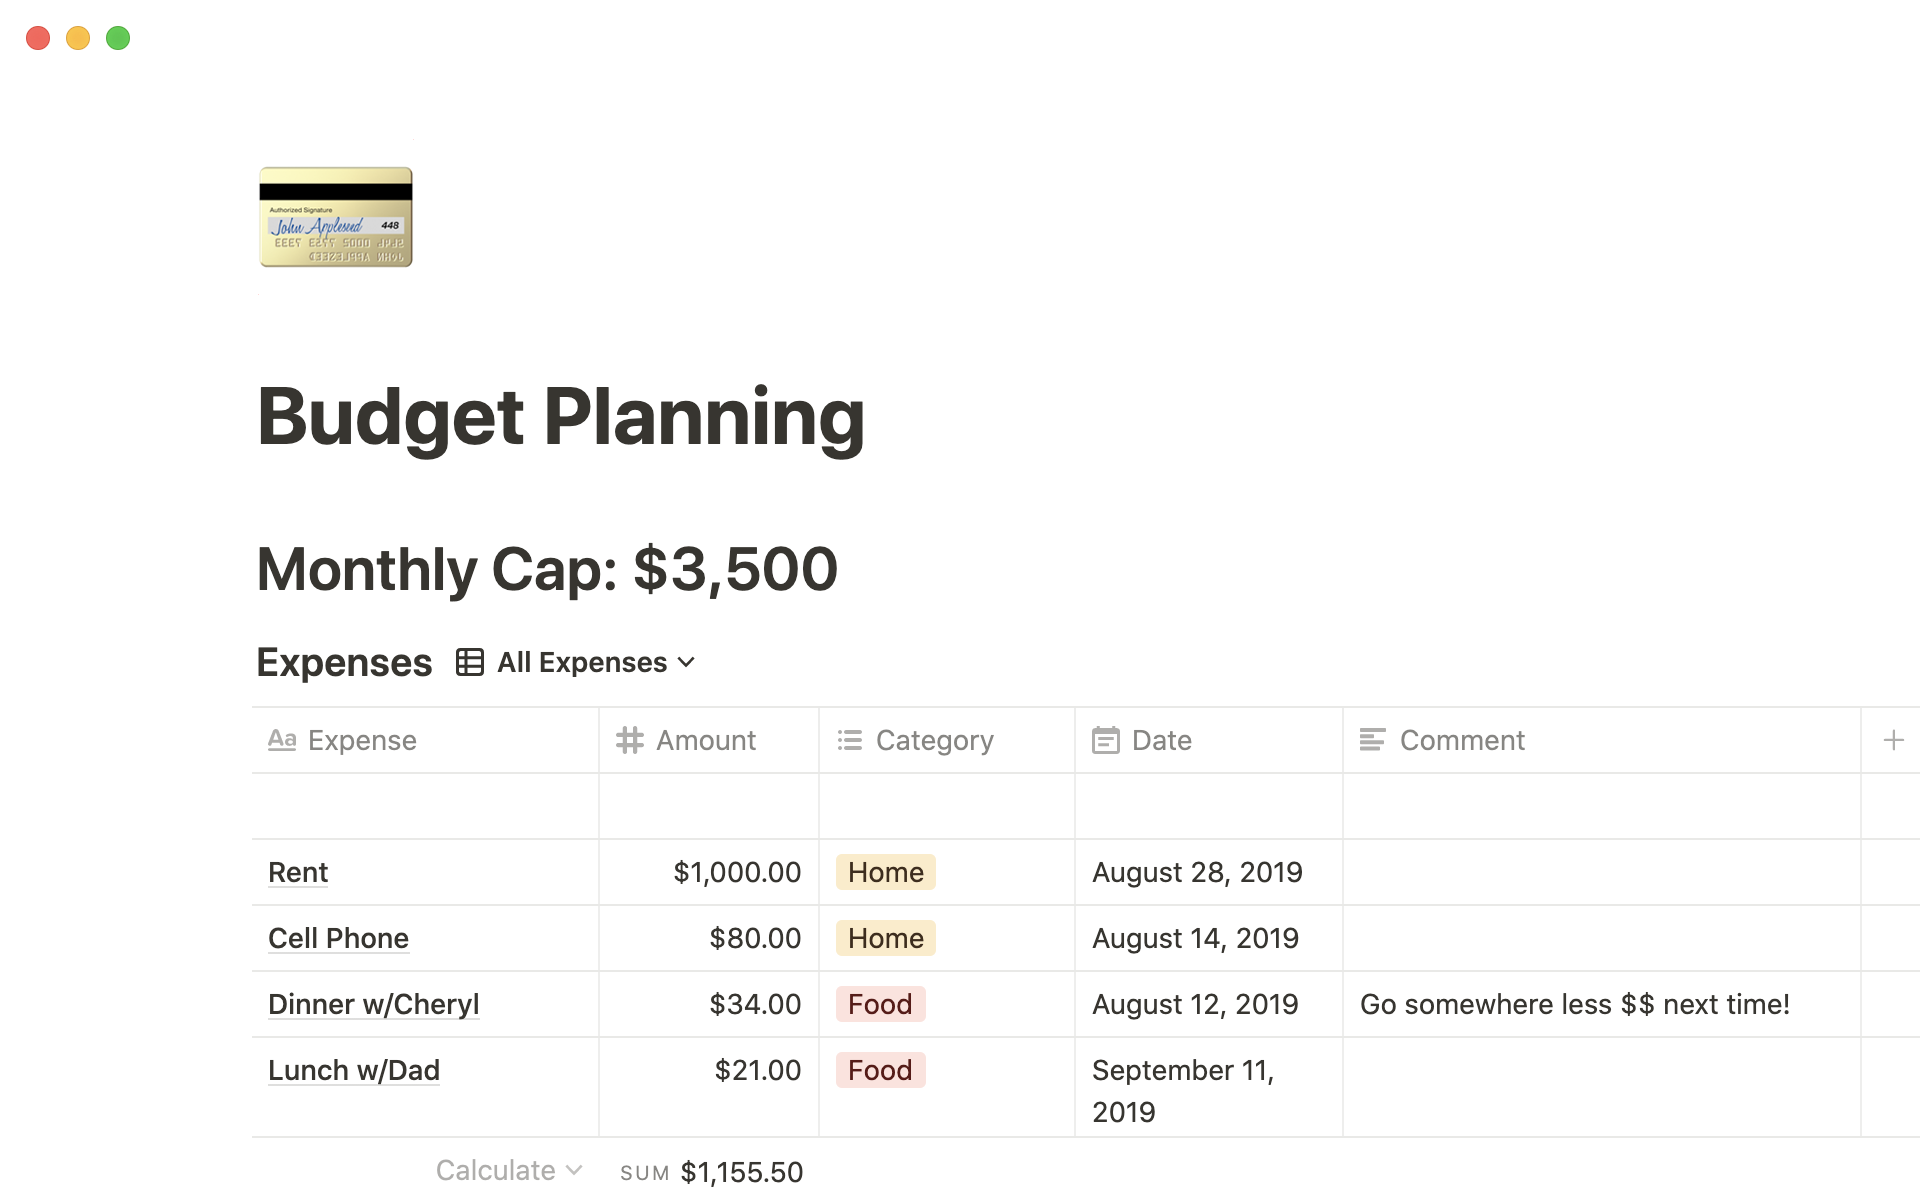 The desktop image for the Budget planning template